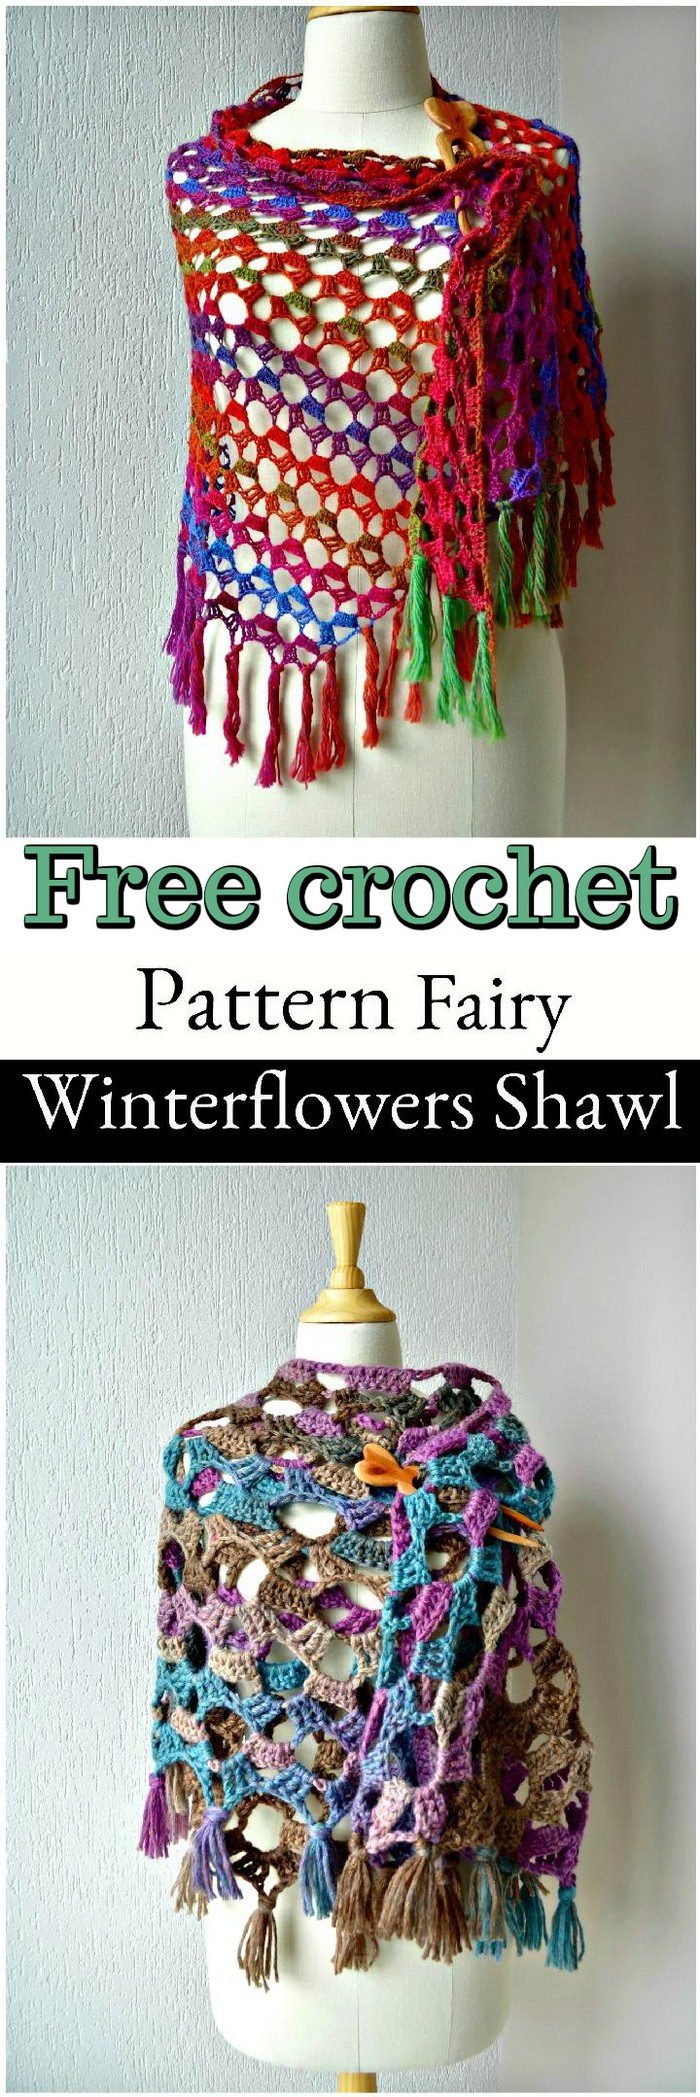 Free Crochet Patterns For Ponchos Free Crochet Poncho Patterns To Make Your Summer Lovely